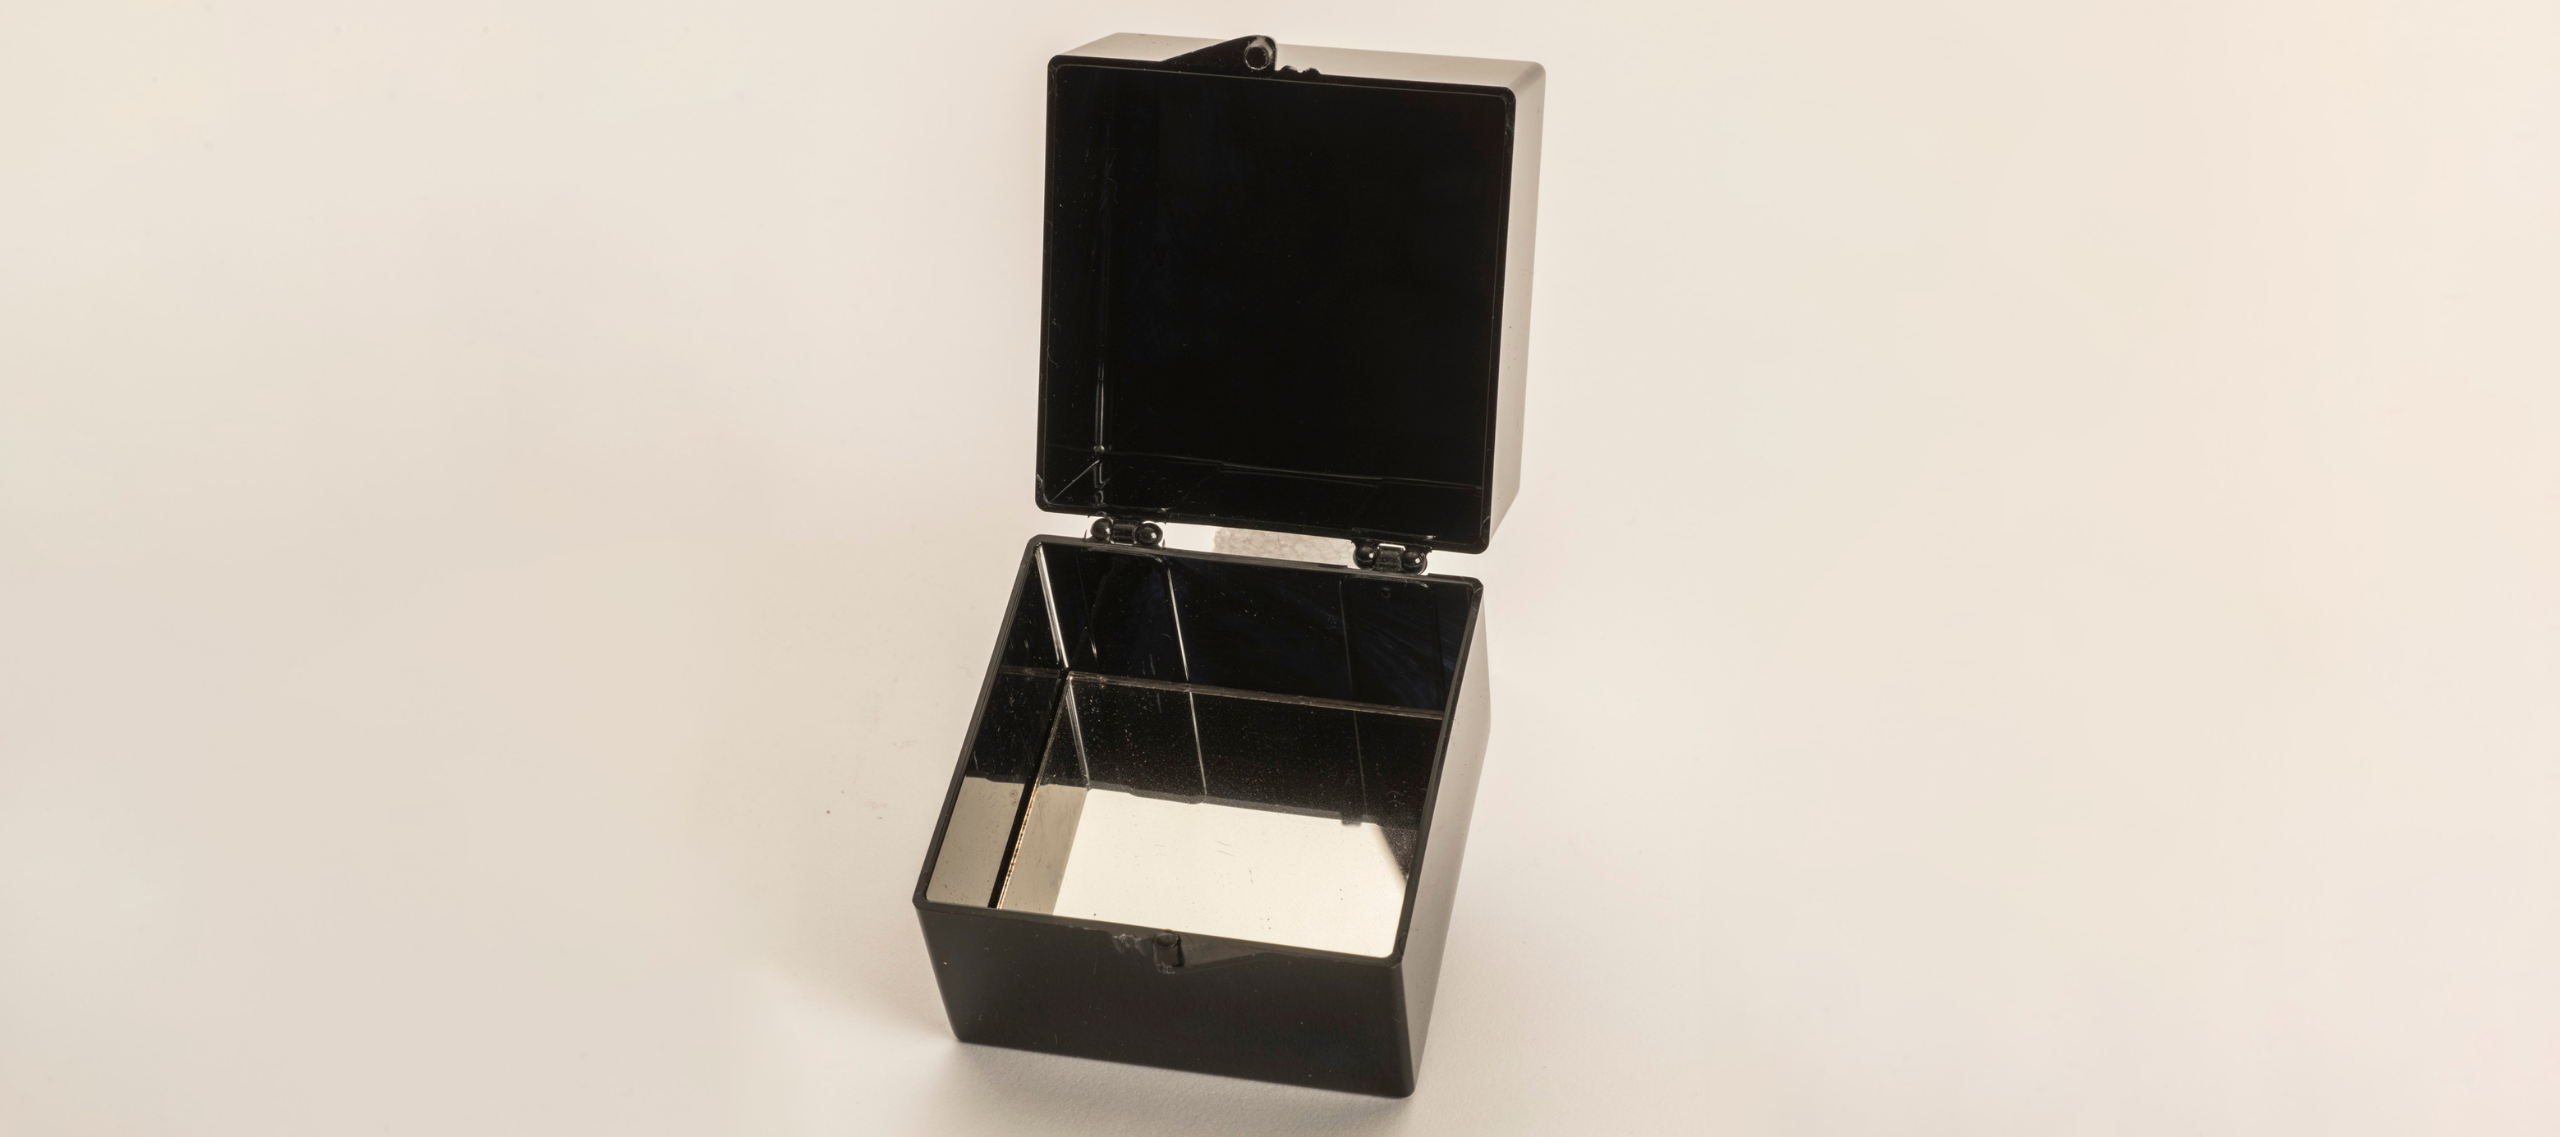 A square, black box open with its square, black lid facing up. It sits on a white background. Inside the box is a small mirror.